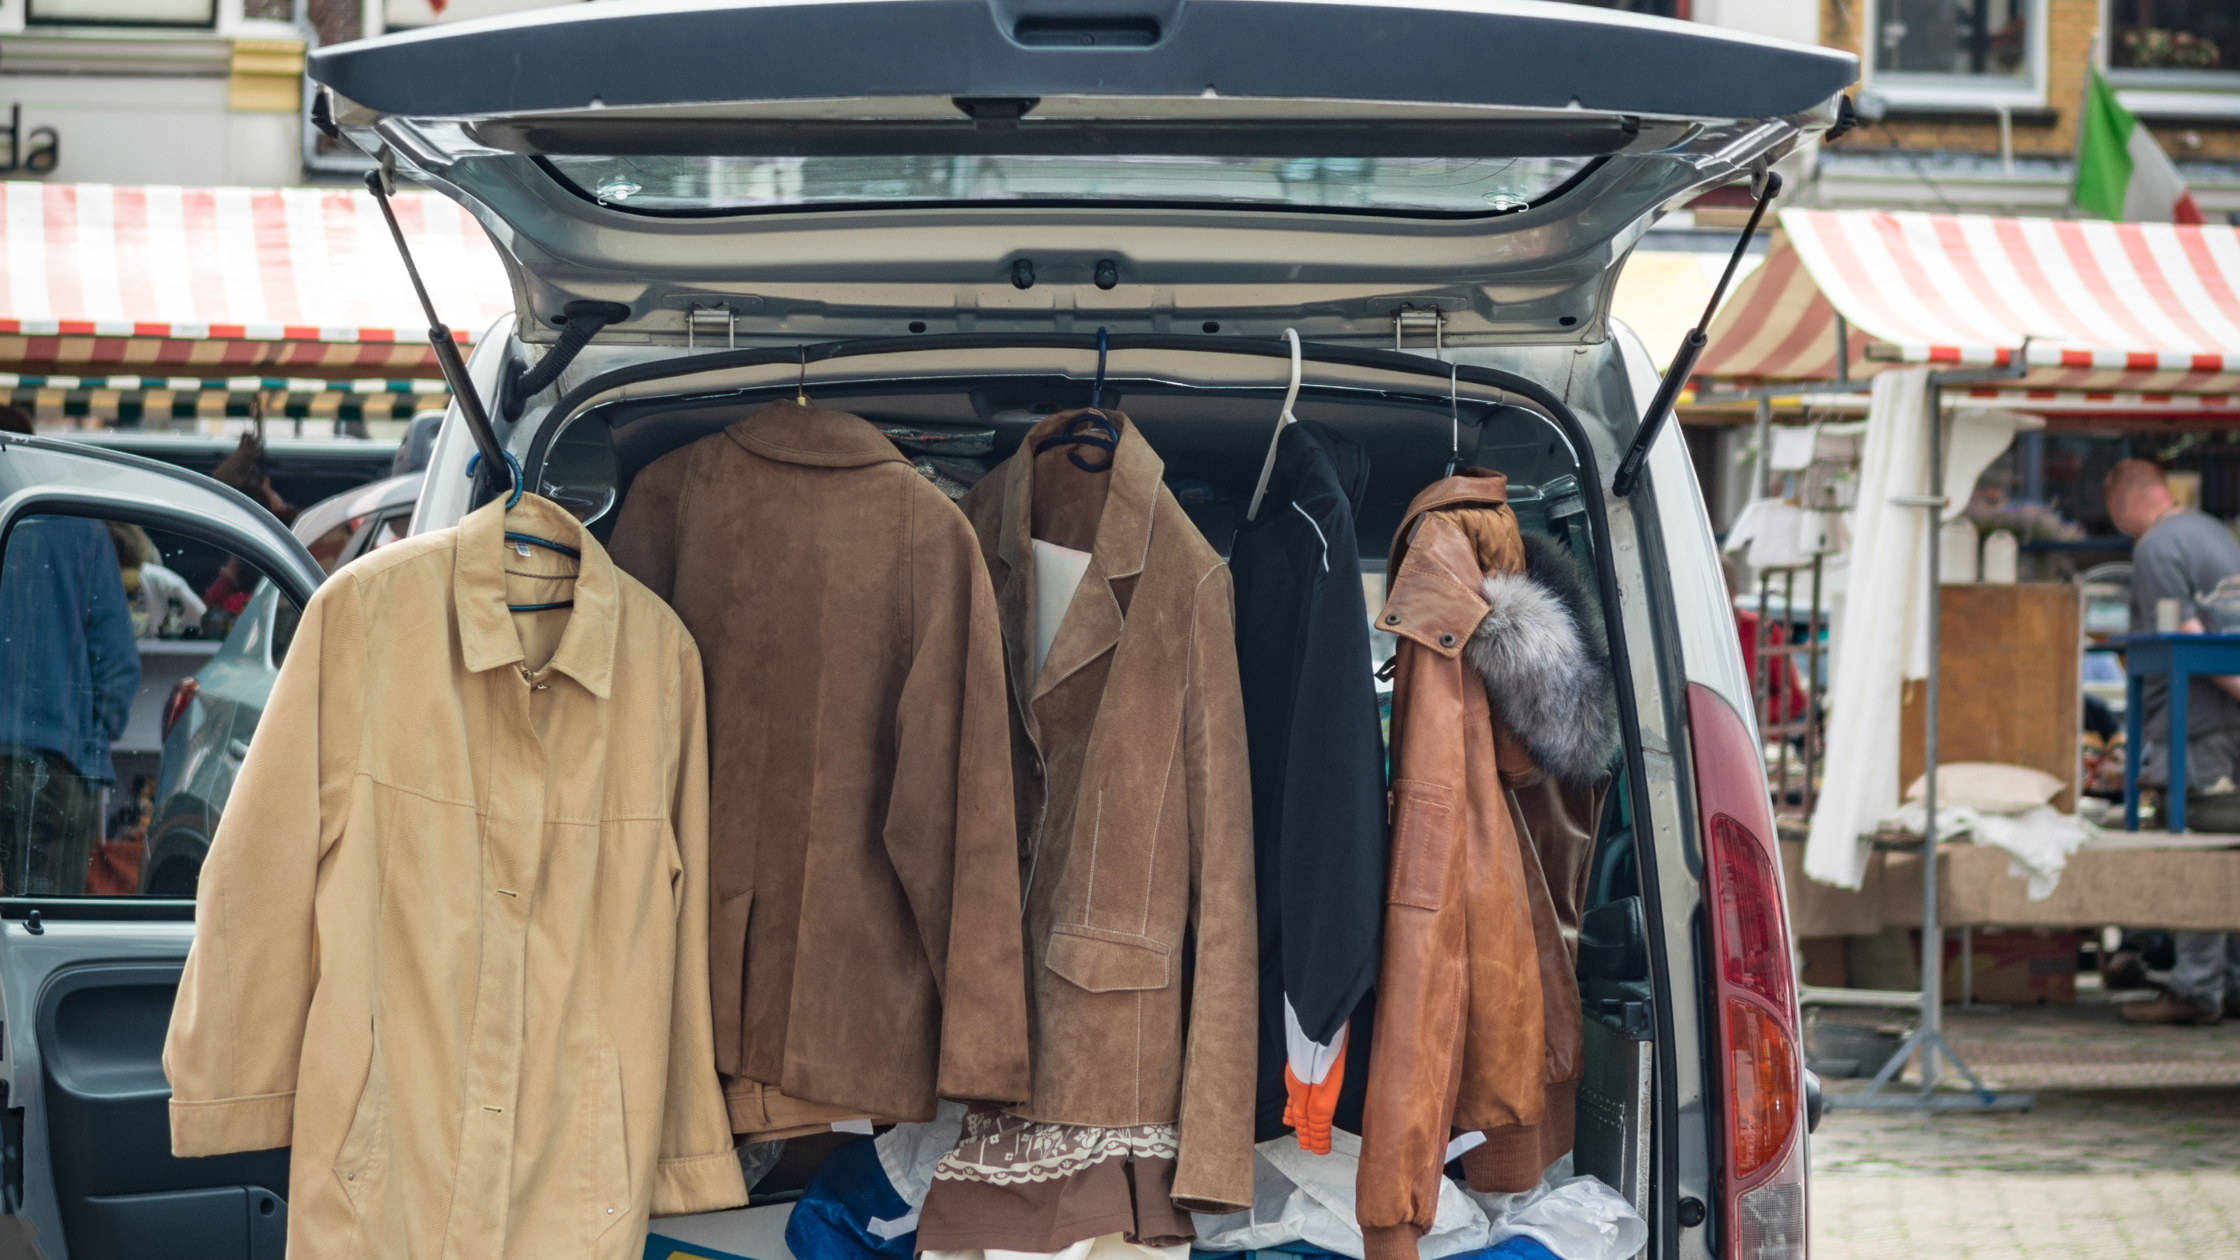 Car boot sale small business idea at home